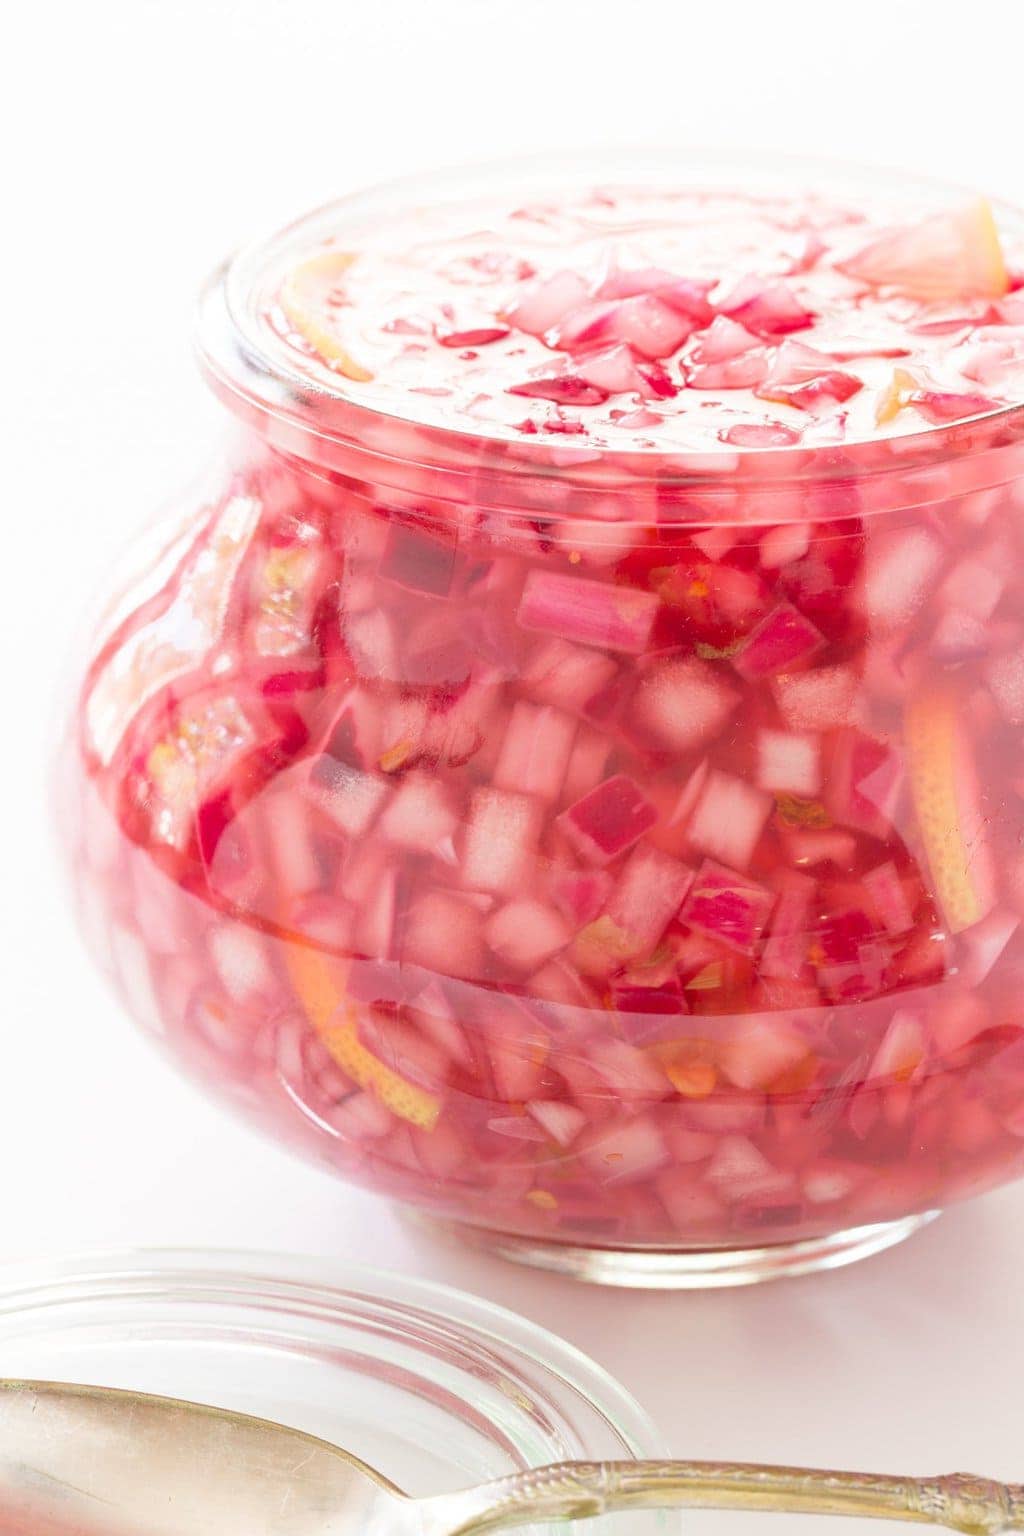 Lemon Pickled Red Onions - a beautiful and delicious condiment that takes less than 10 minutes to make. Perfect for sandwiches, salads, pizzas... anything! thecafesucrefarine.com